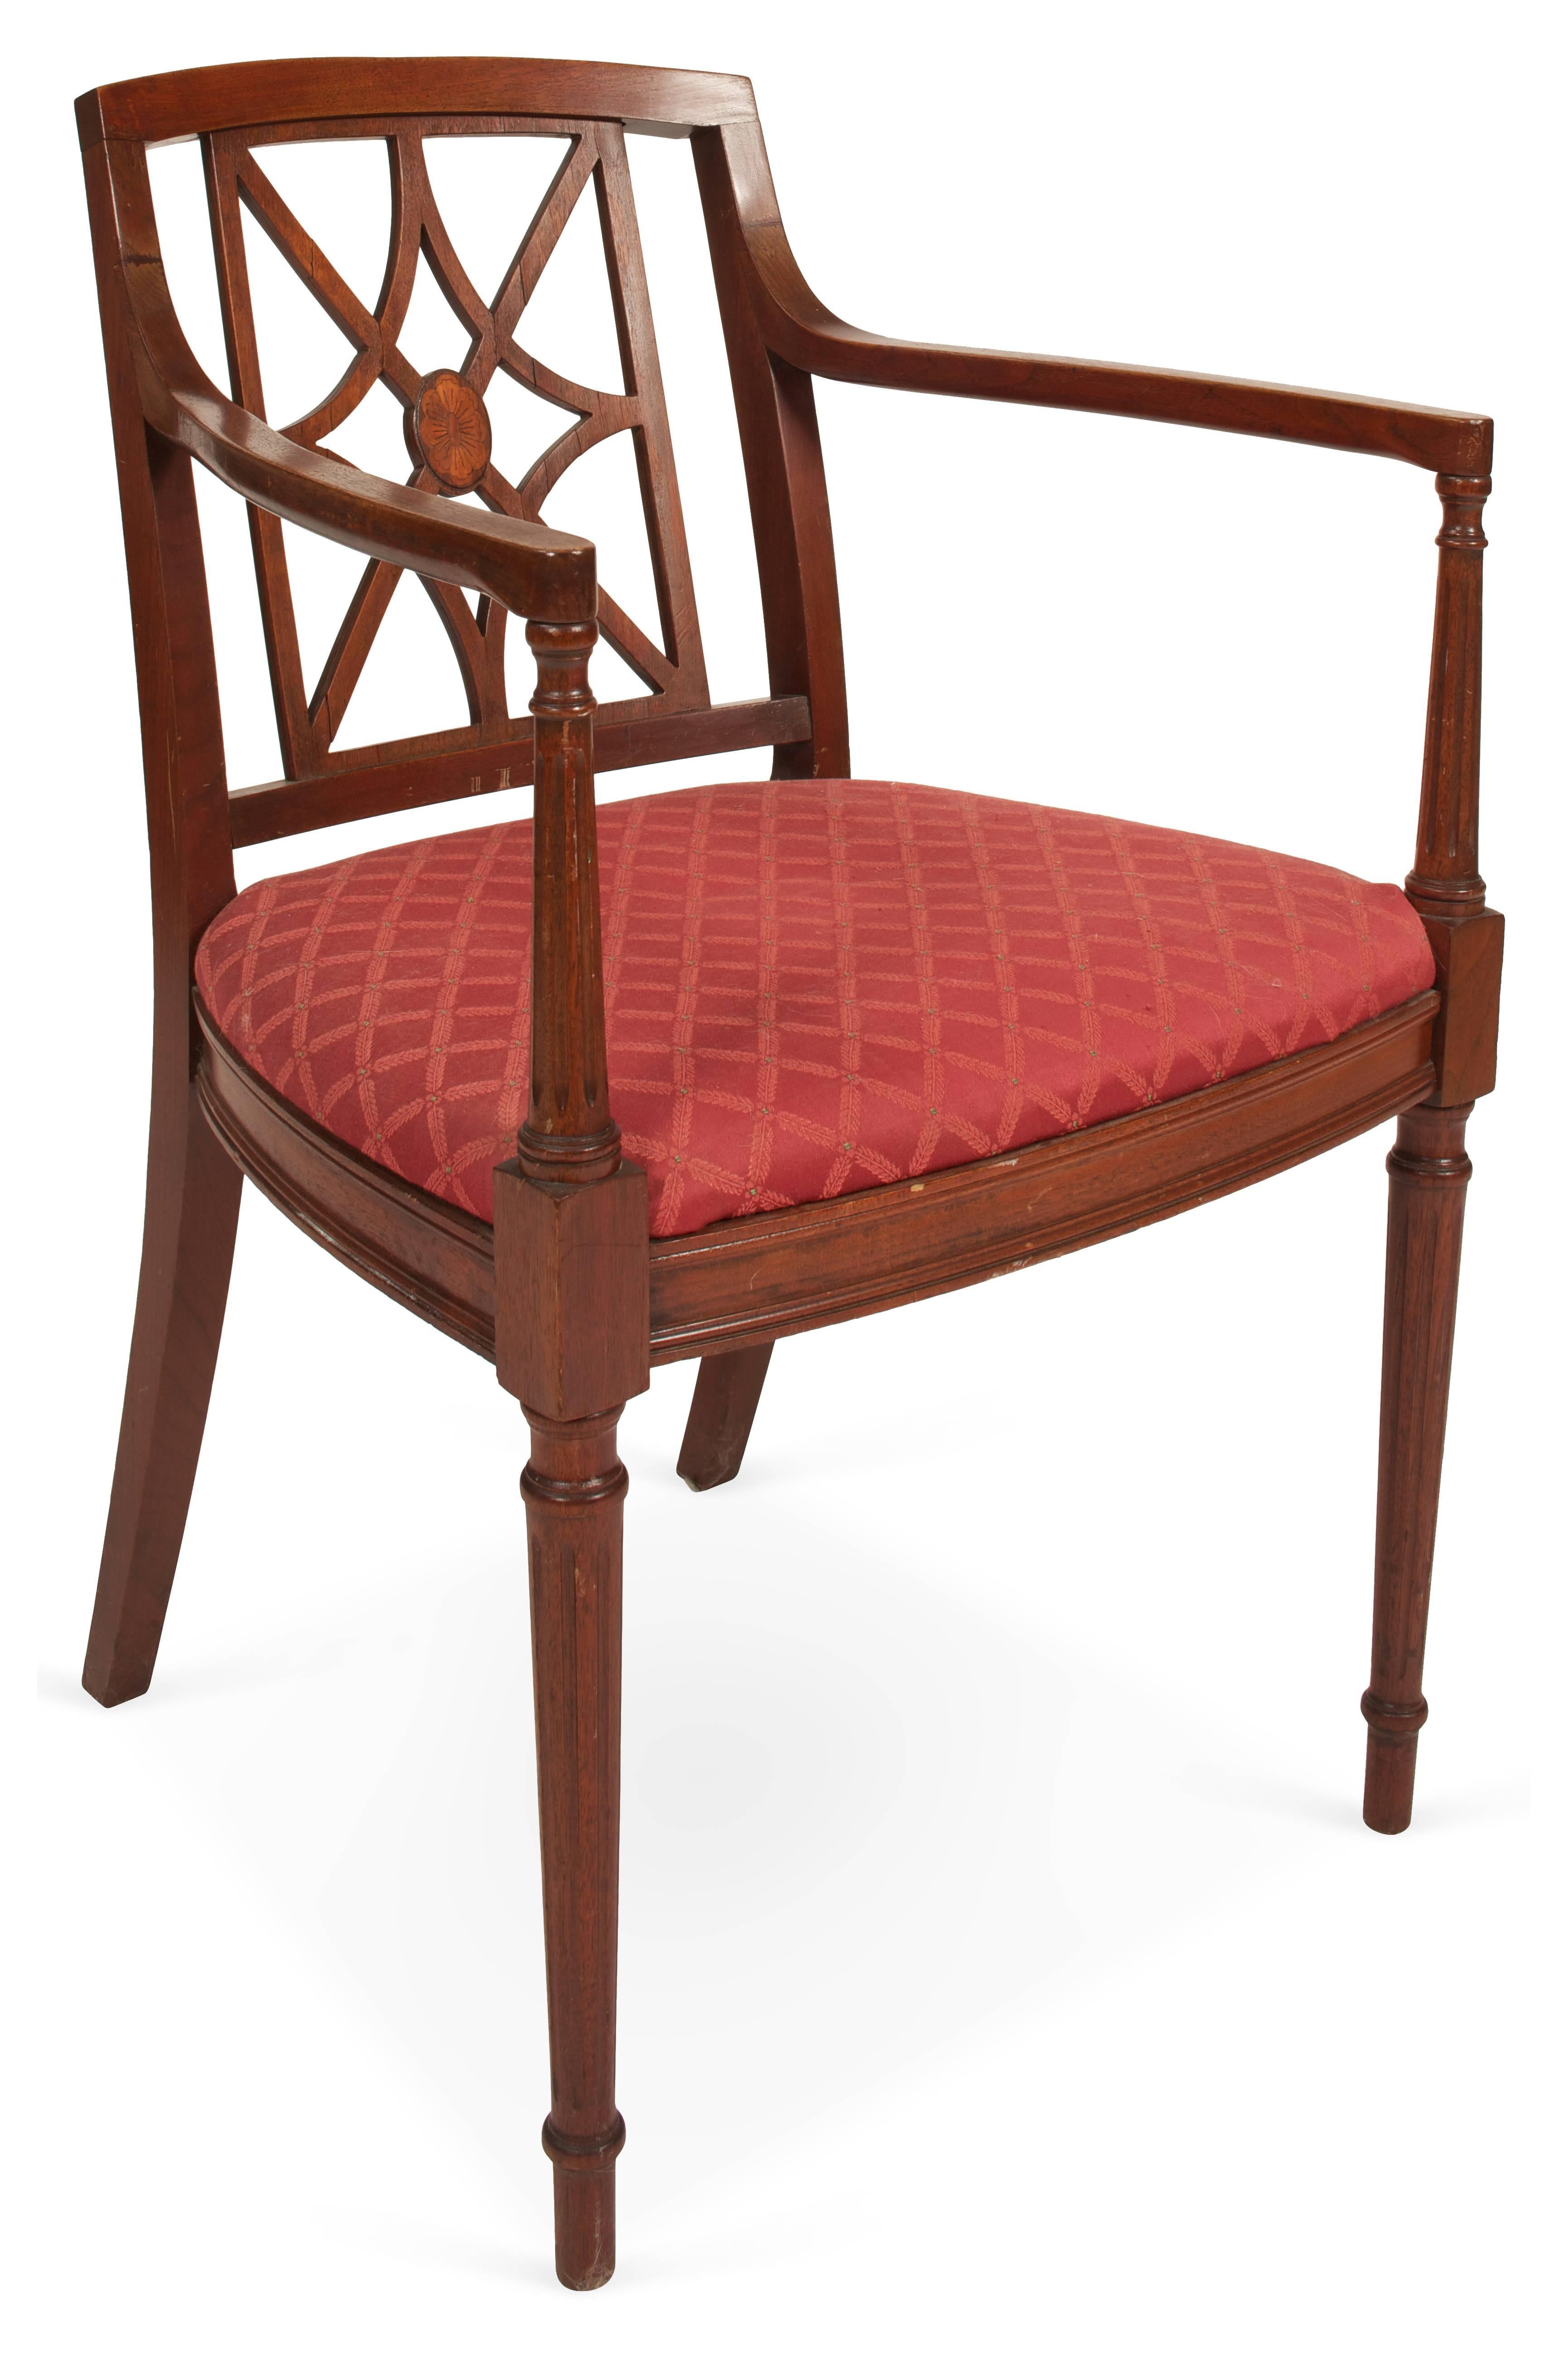 Vintage mahogany chair in the English Sheraton style has a fretwork designed back, upholstered seat, fluted front legs and arm supports.